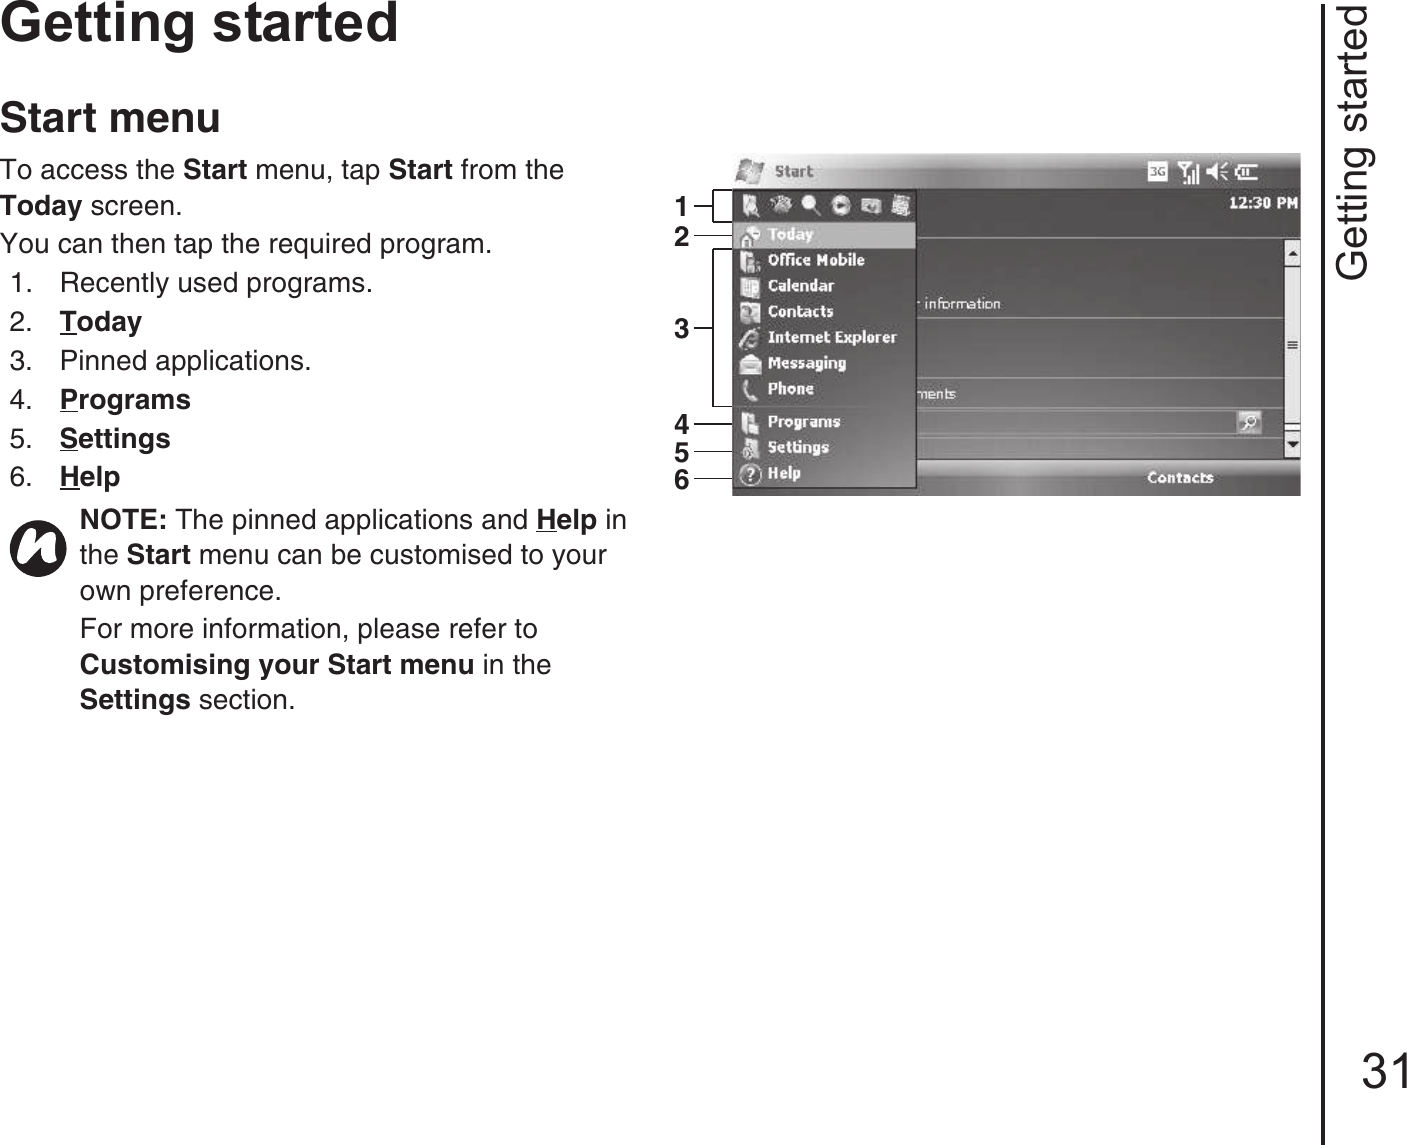 Getting started31Getting startedStart menuTo access the Start menu, tap Start from the Today screen.You can then tap the required program.1.  Recently used programs. 2.  Today3.  Pinned applications.4.  Programs 5.  Settings 6.  HelpNOTE: The pinned applications and Help in the Start menu can be customised to your own preference.For more information, please refer to Customising your Start menu in the Settings section.123456